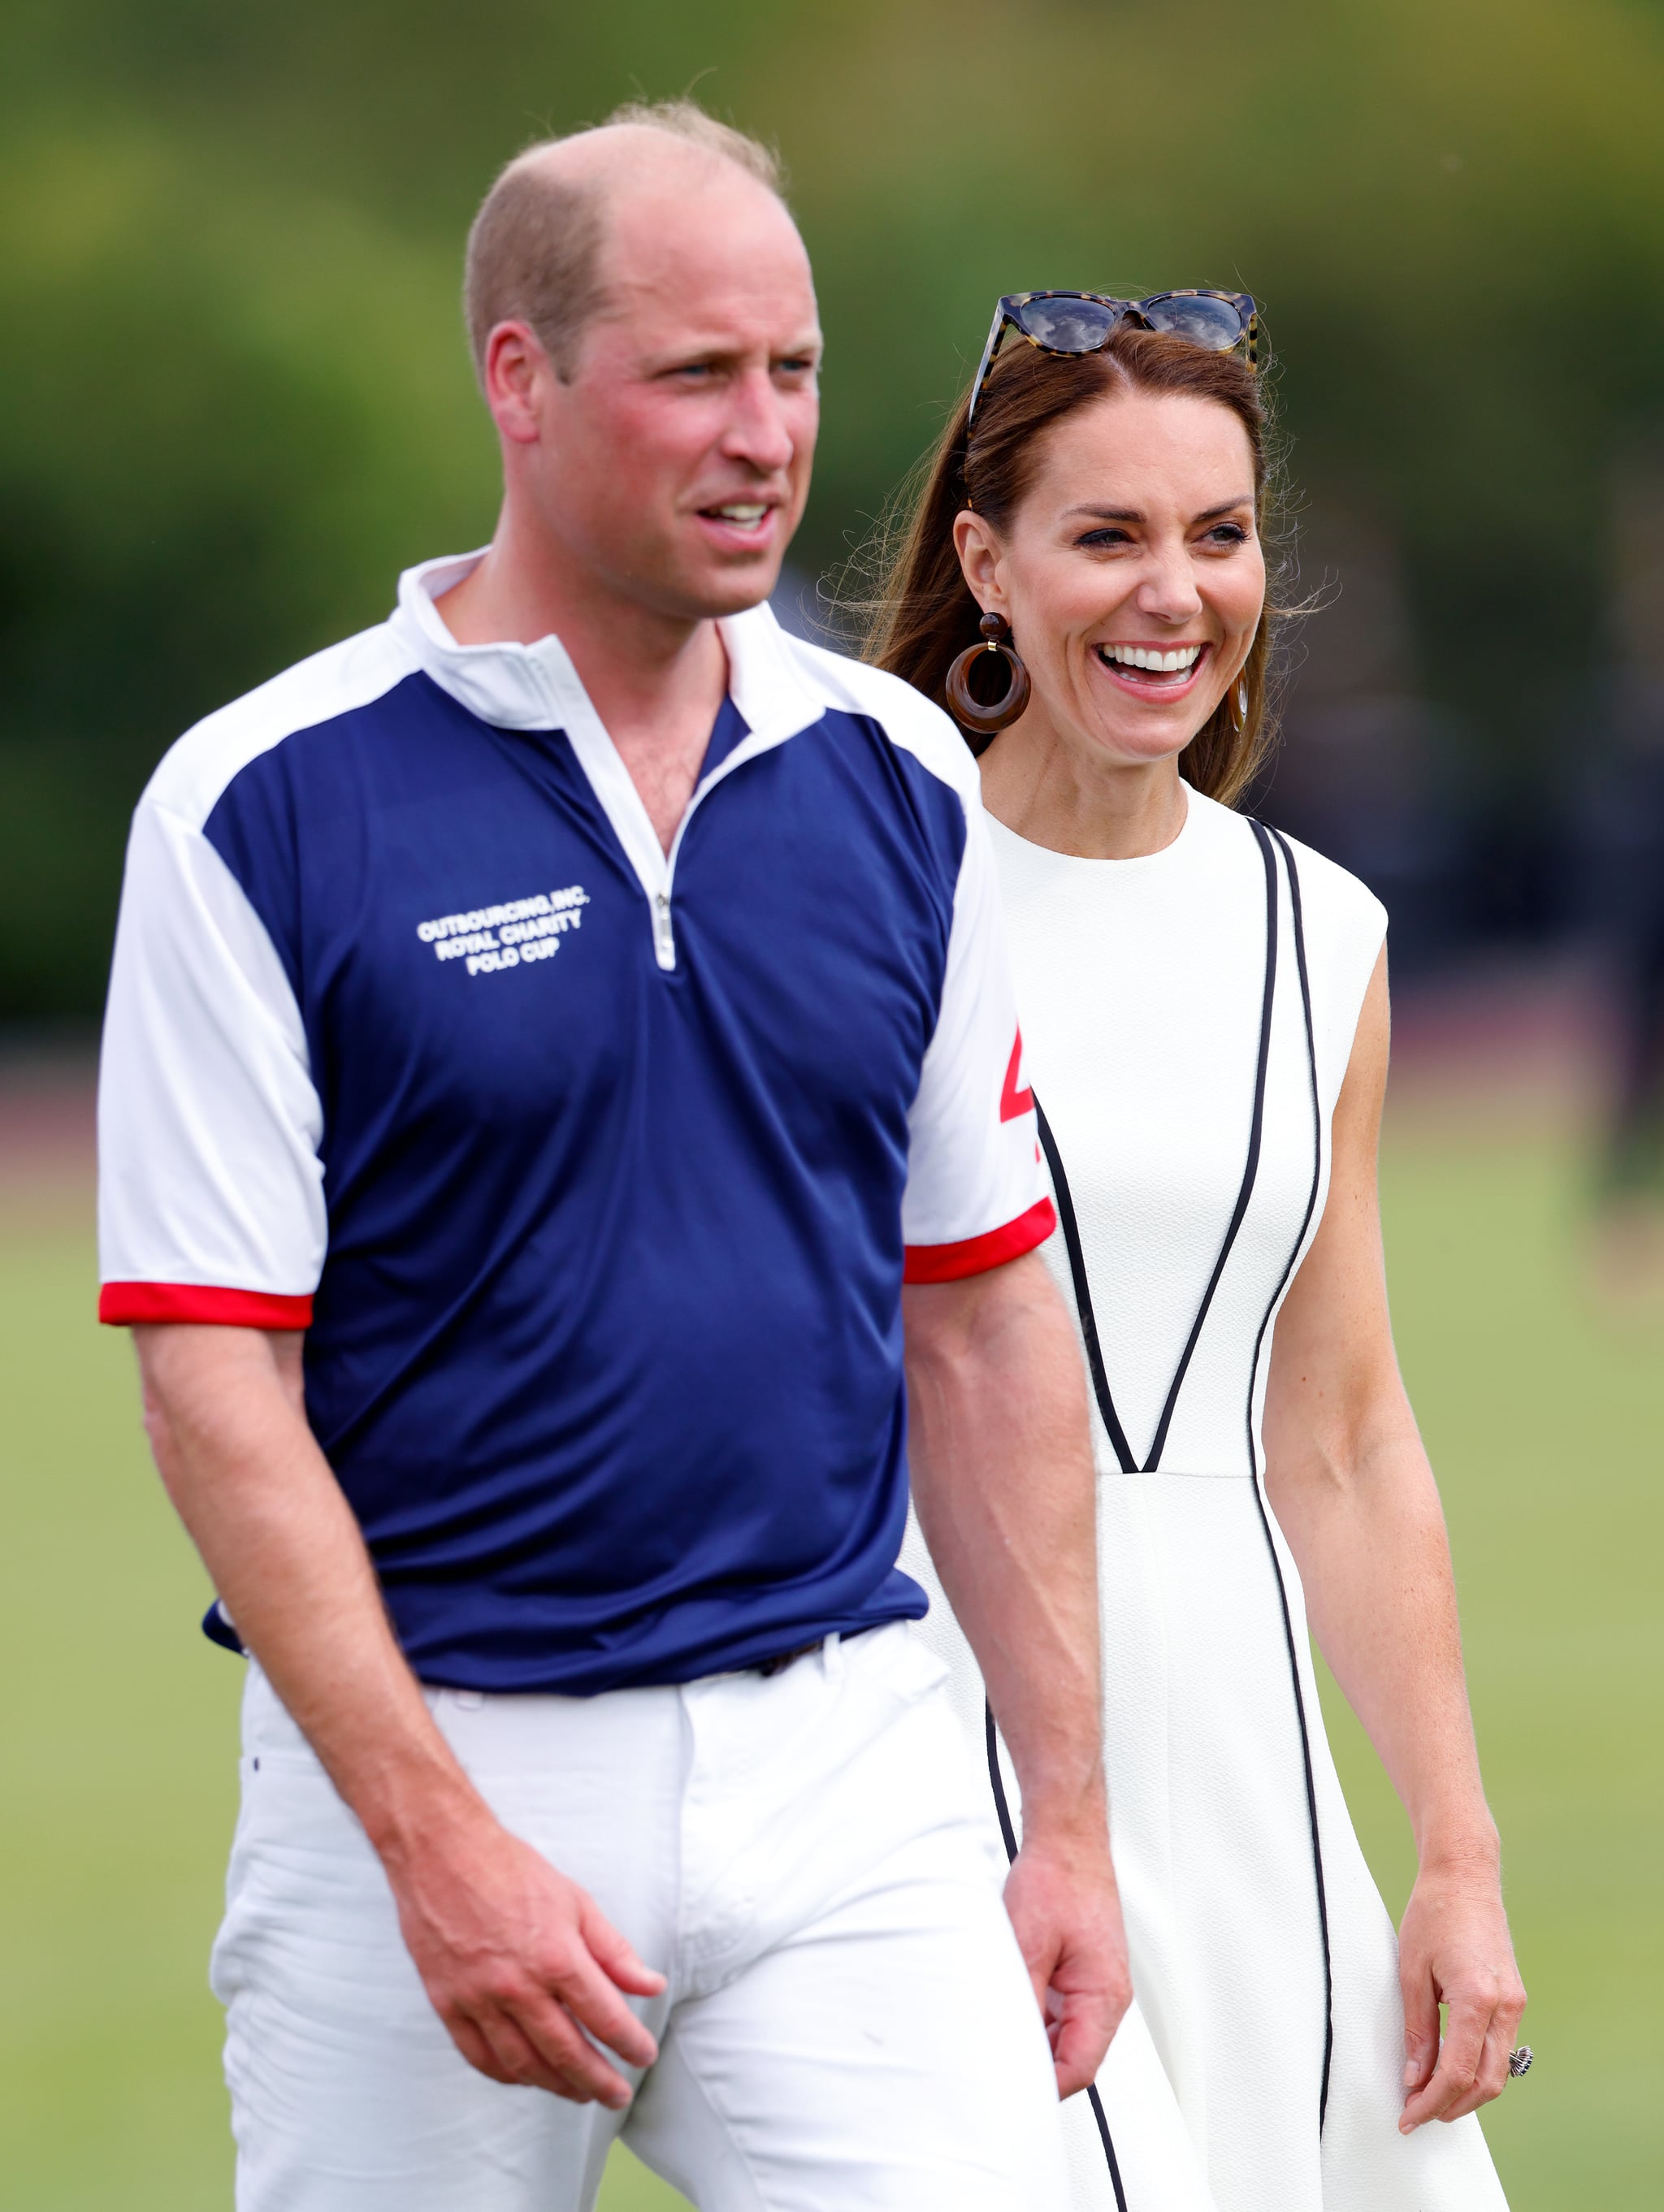 WINDSOR, UNITED KINGDOM - JULY 06: (EMBARGO FOR PUBLICATION IN UK NEWSPAPERS UP TO 24 HOURS AFTER CREATION DATE AND TIME) Prince William, Duke of Cambridge and Catherine, Duchess of Cambridge attend the Cup Out-Sourcing Inc. Royal Charity polo match at Guards Polo Club, Flemish Farm on July 6, 2022 in Windsor, England.  (Photo by Max Mumby/Indigo/Getty Images)